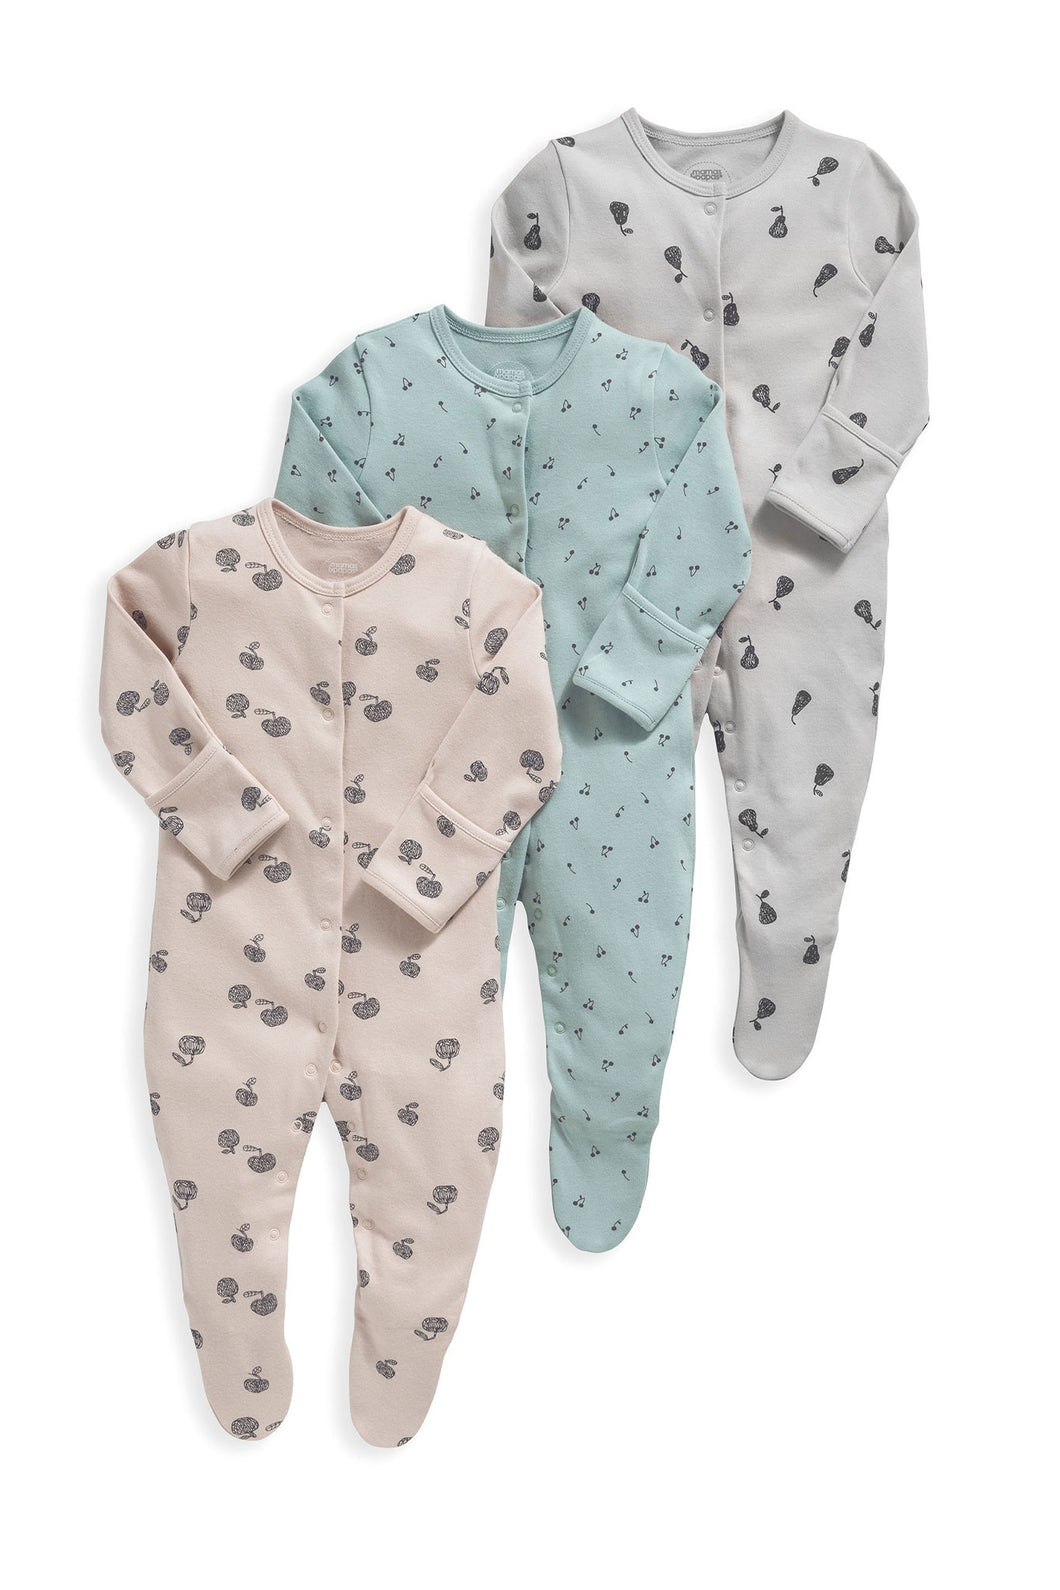 Mamas & Papas Orchard Sleepsuits - 3 Pack